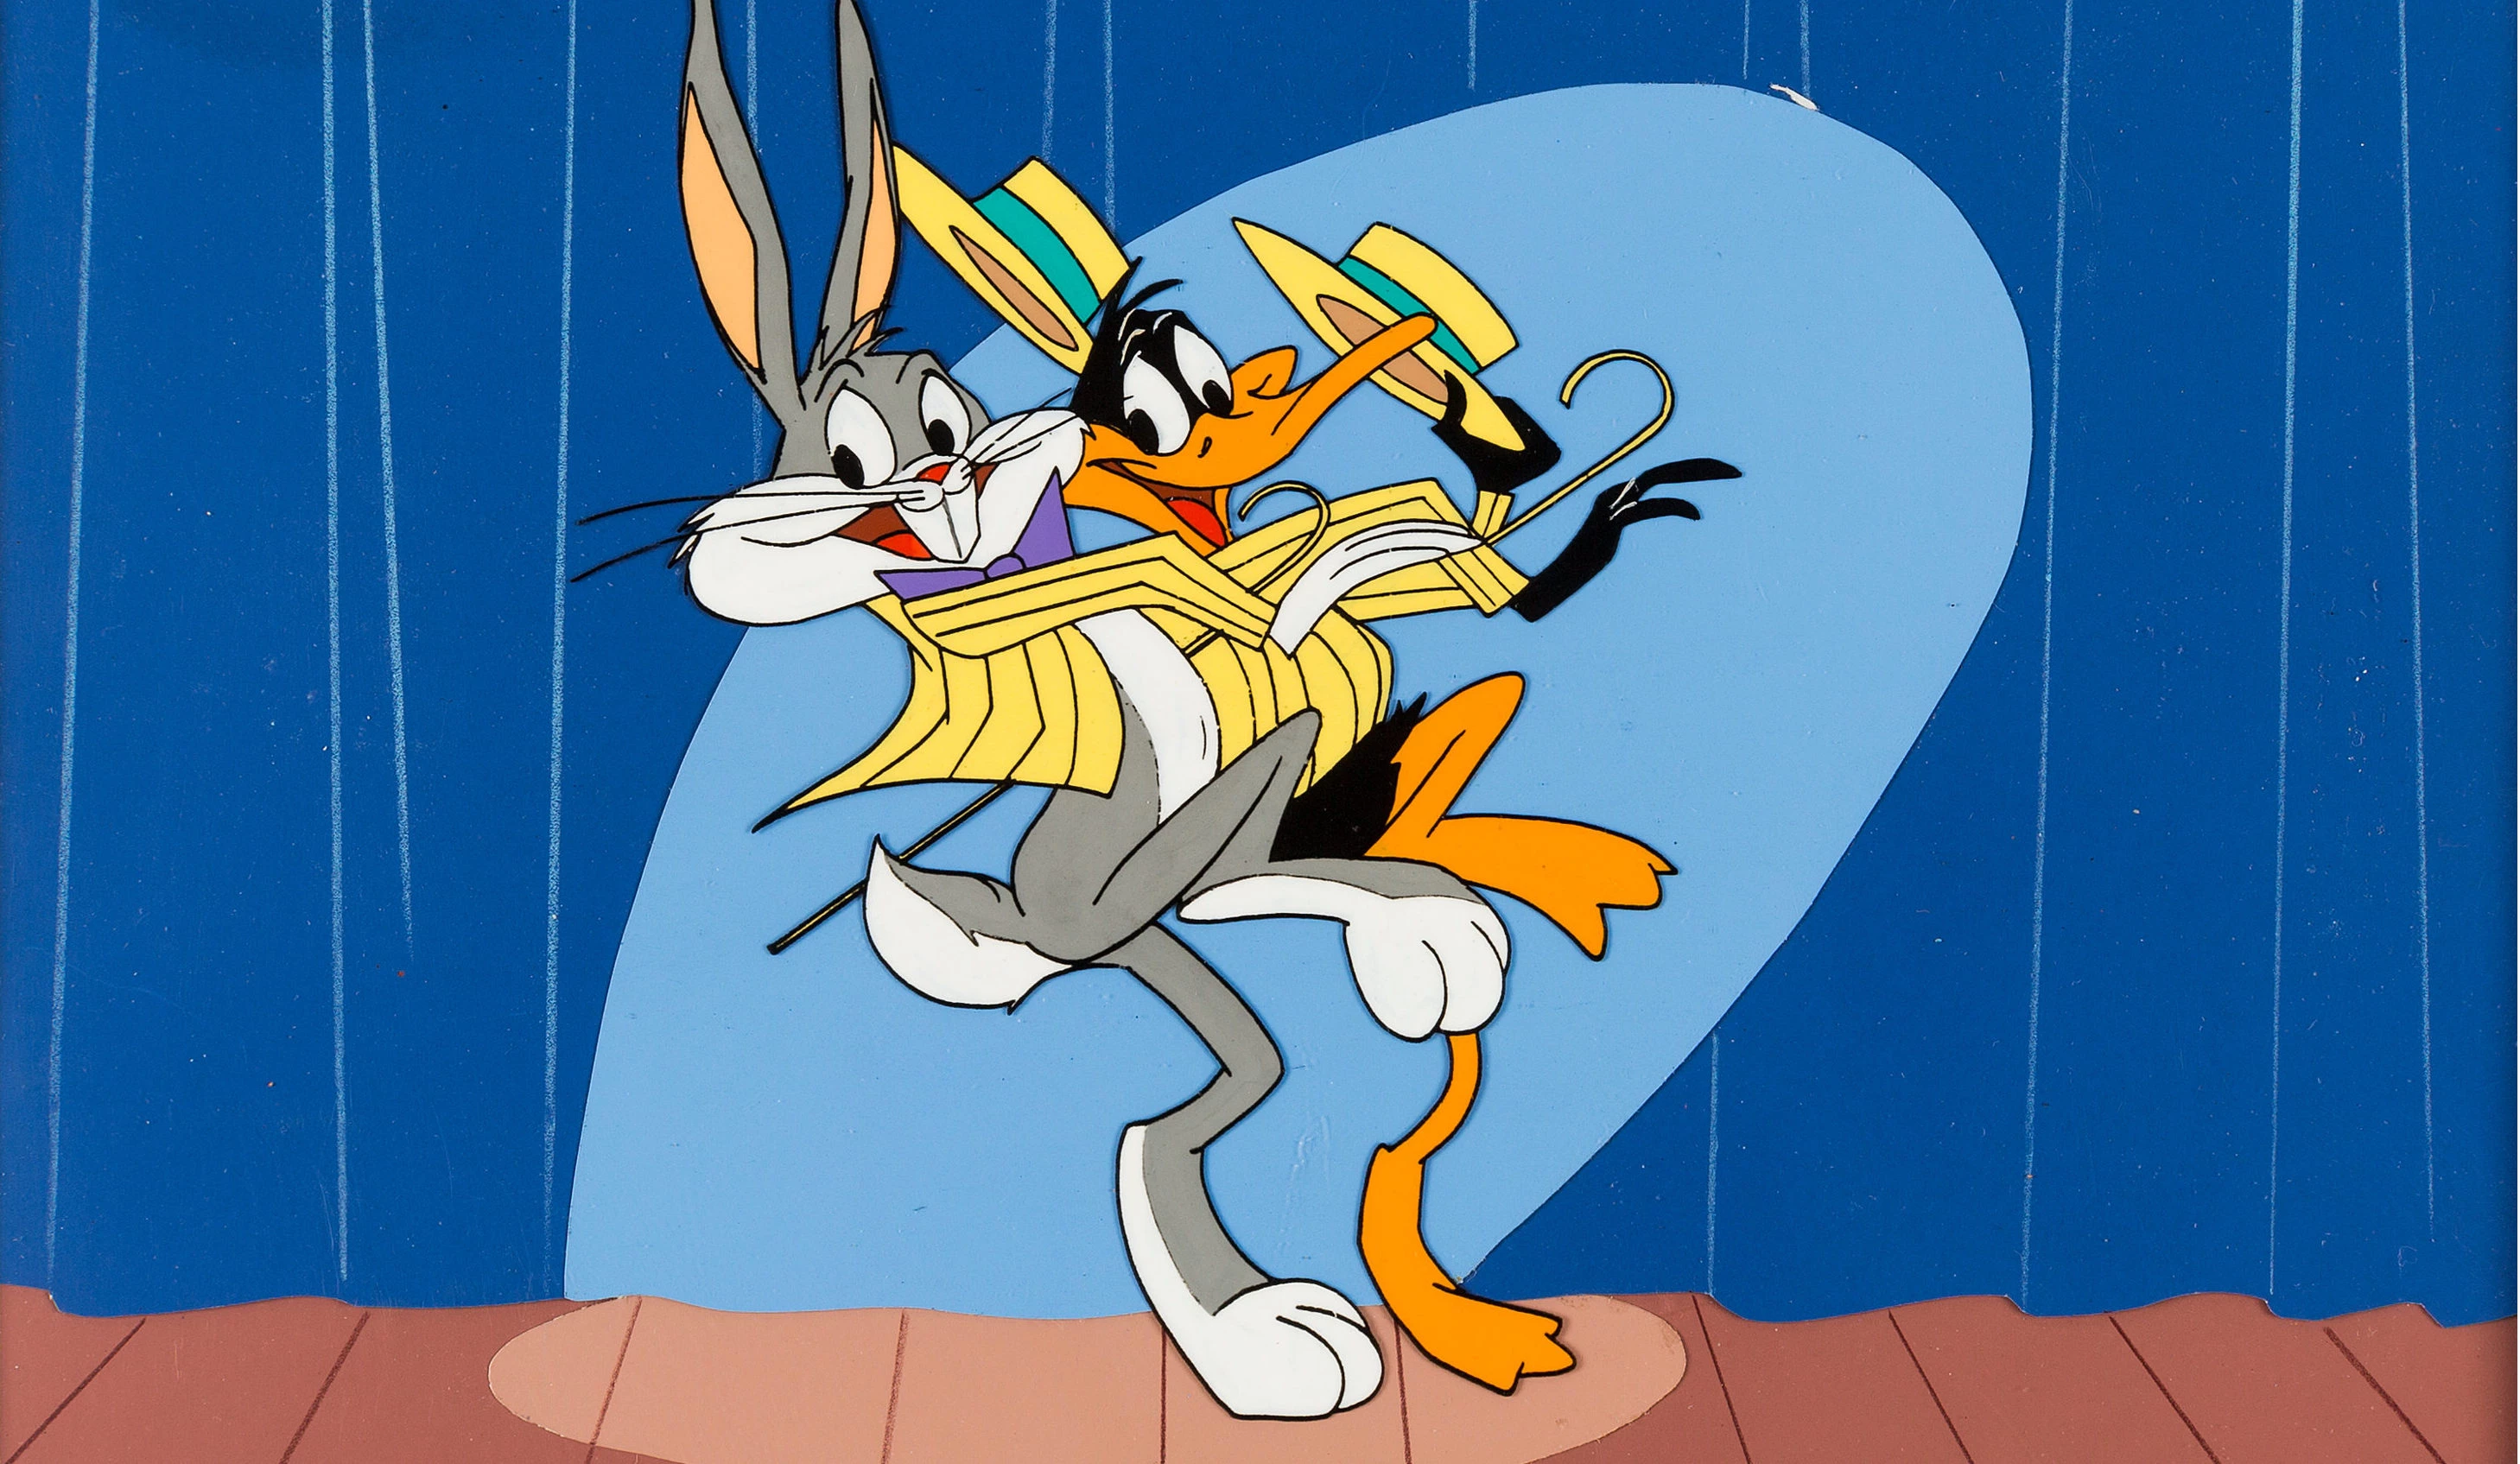 Famous duos in movies: Bugs Bunny And Daffy Duck